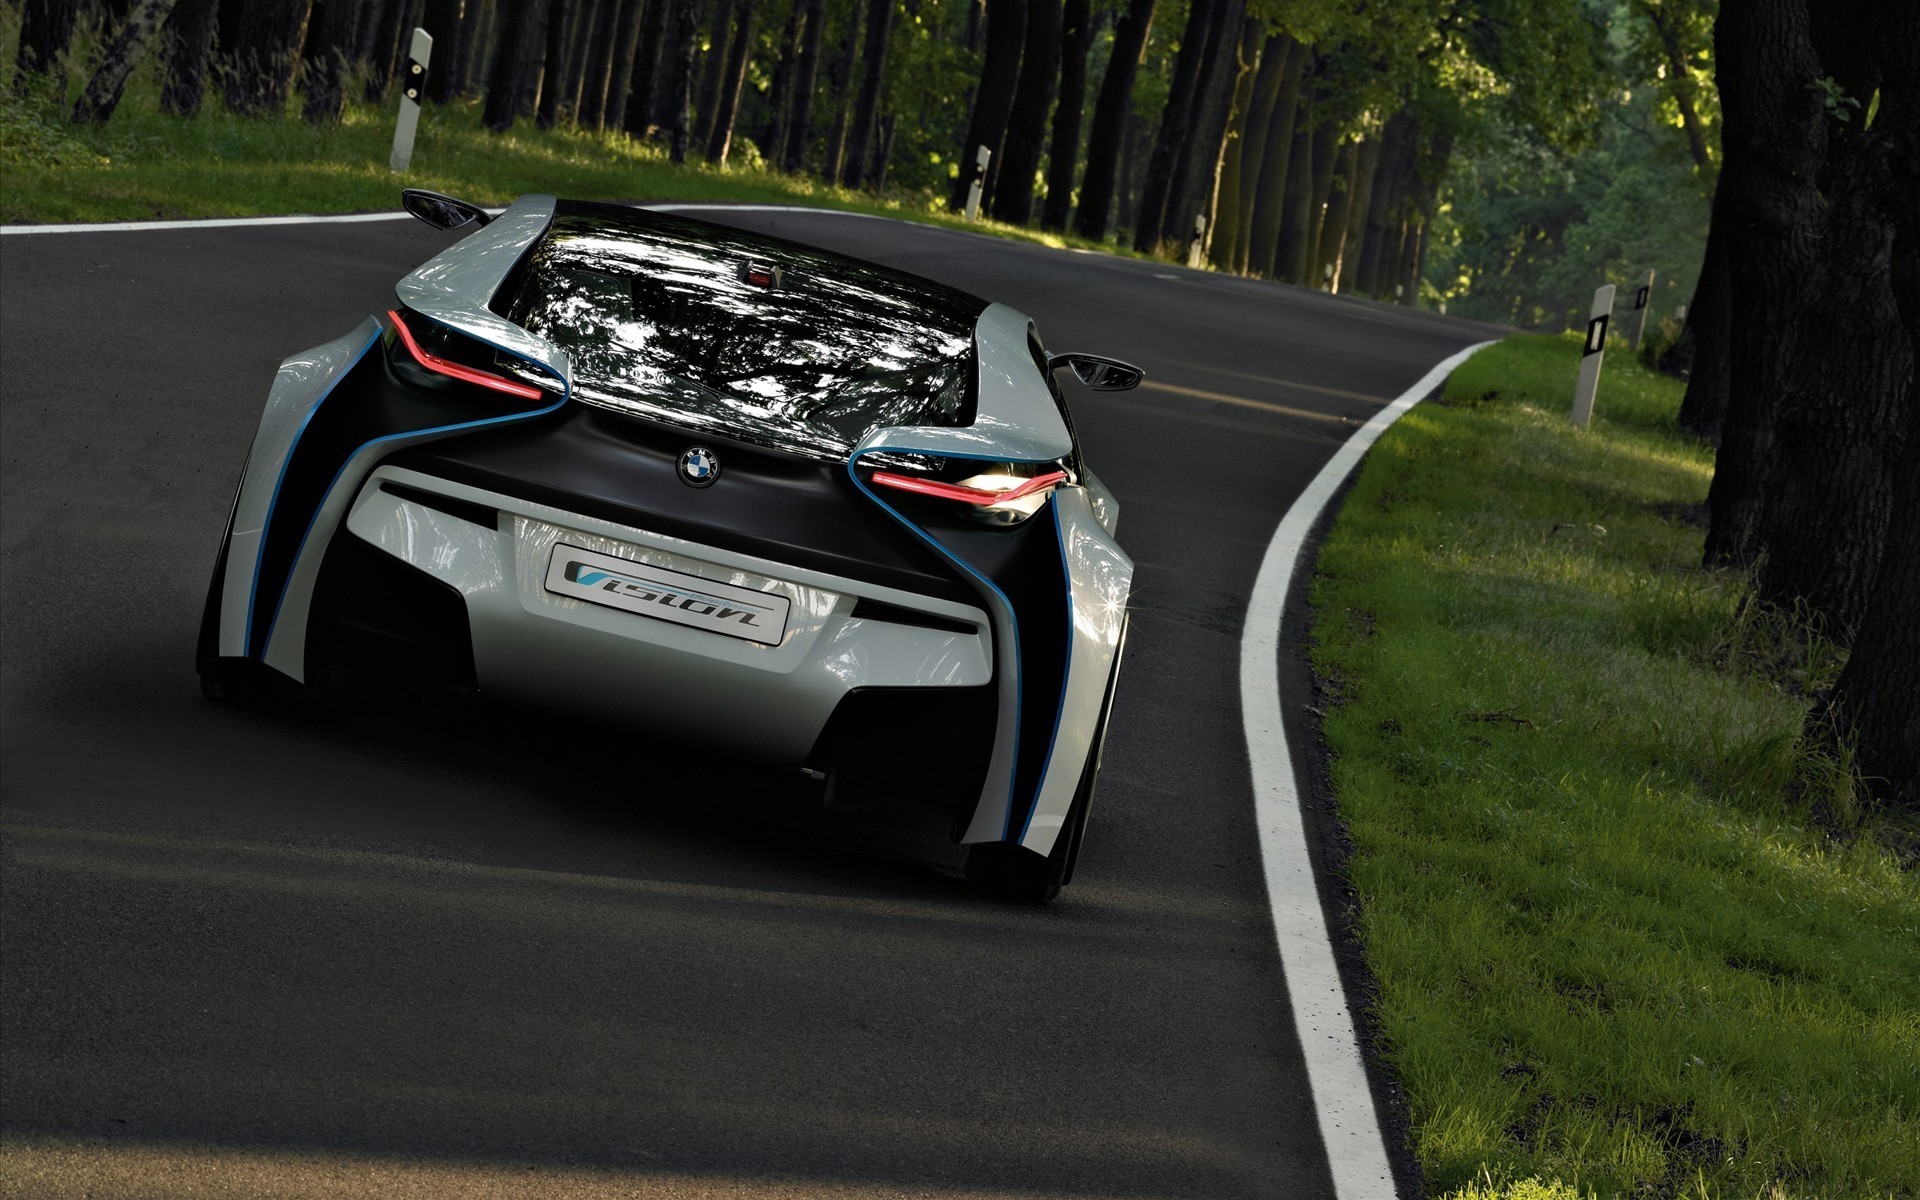 bmw, Cars, Prototypes, Vehicles, Concept, Cars, Bmw, Vision Wallpaper